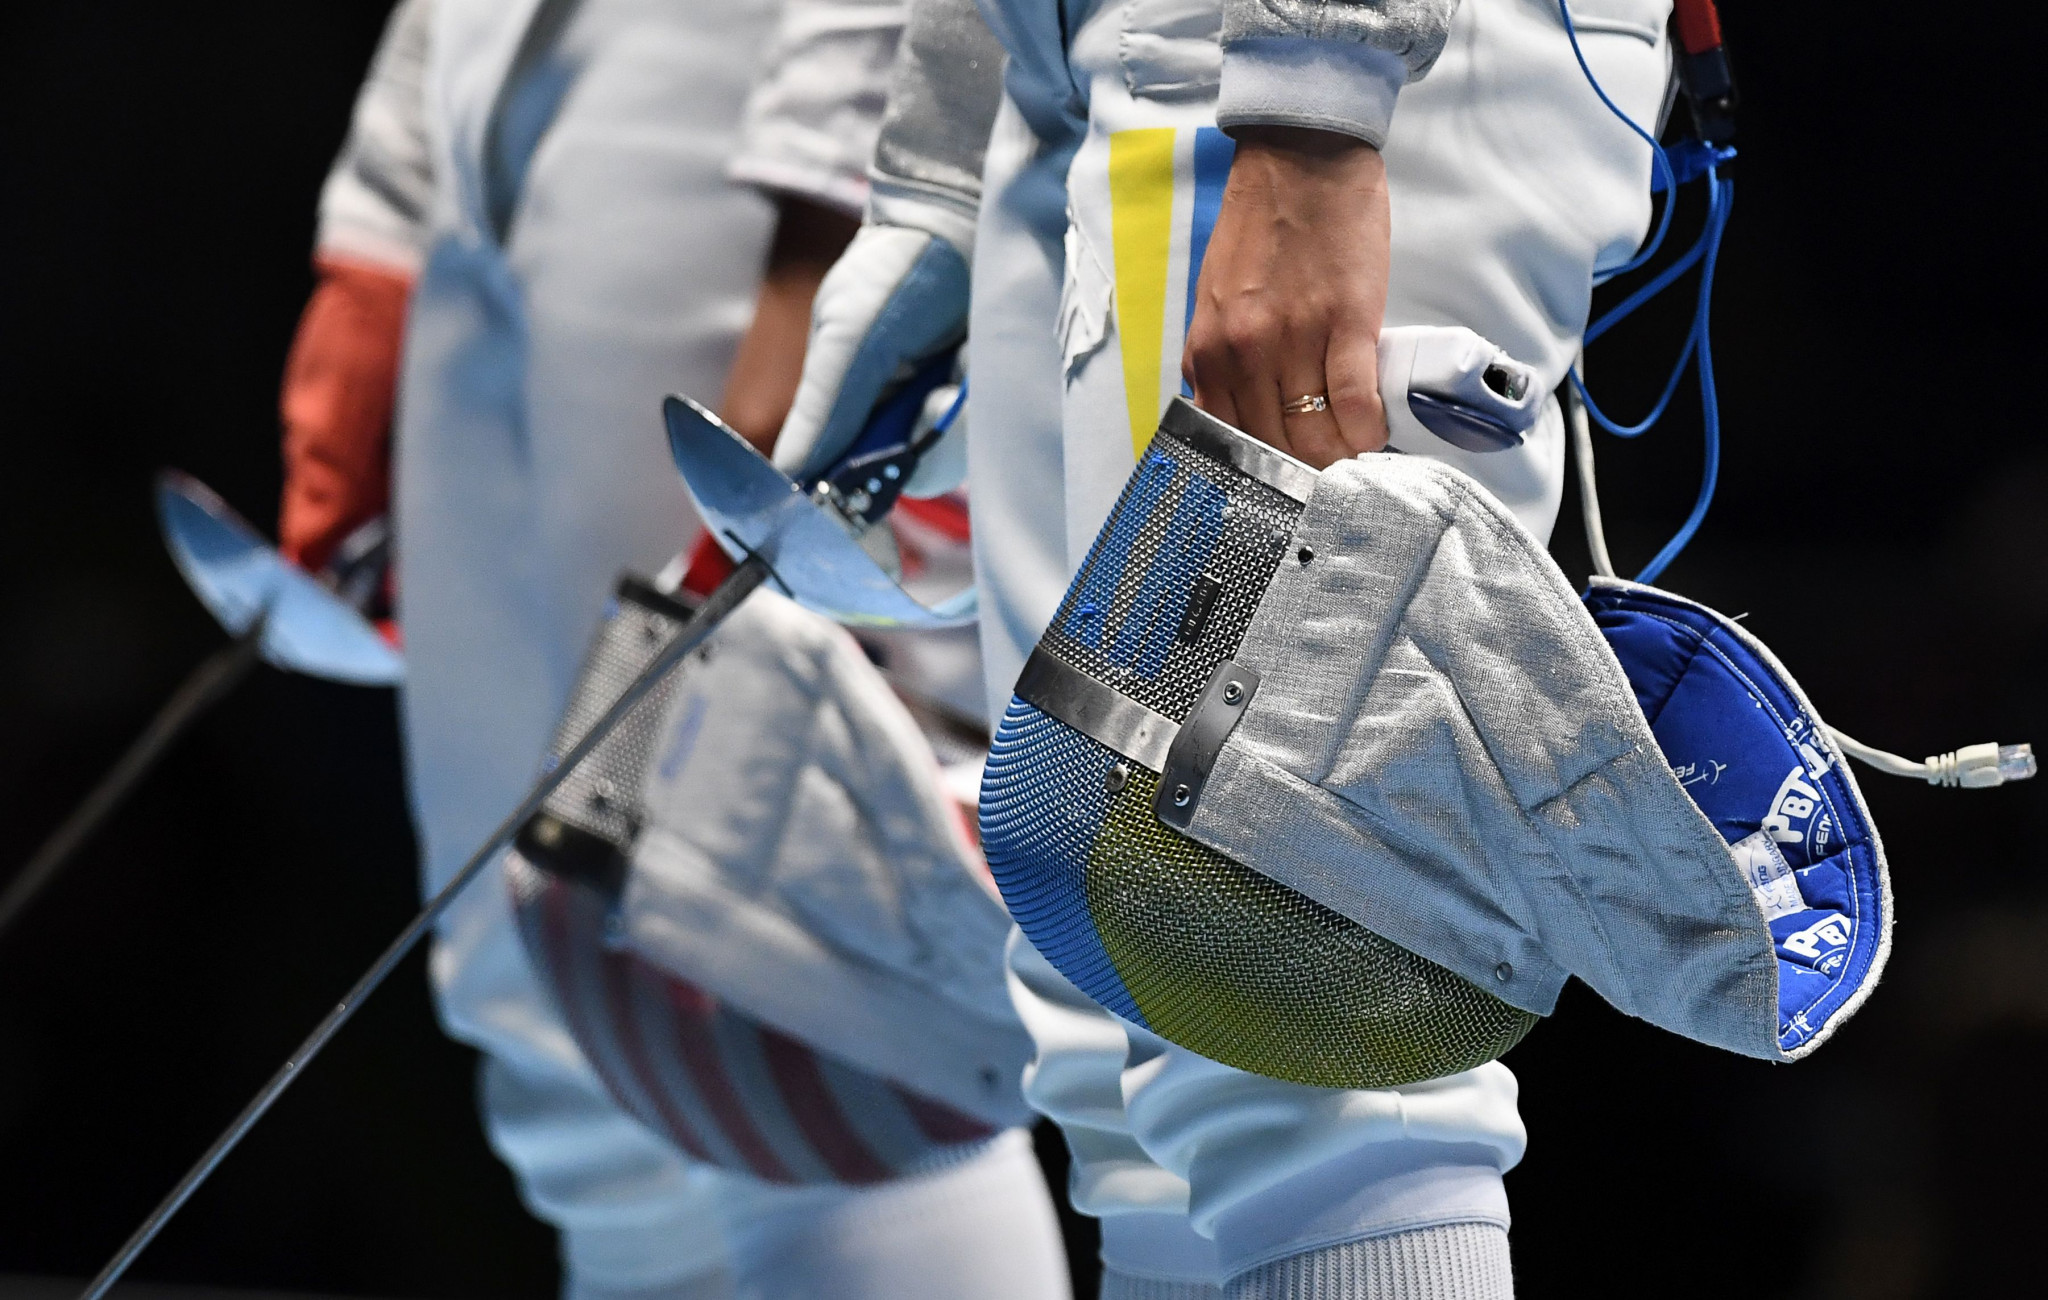 European fencers issue joint statement condemning IOC recommendation for Russians and Belarusians to return as neutrals